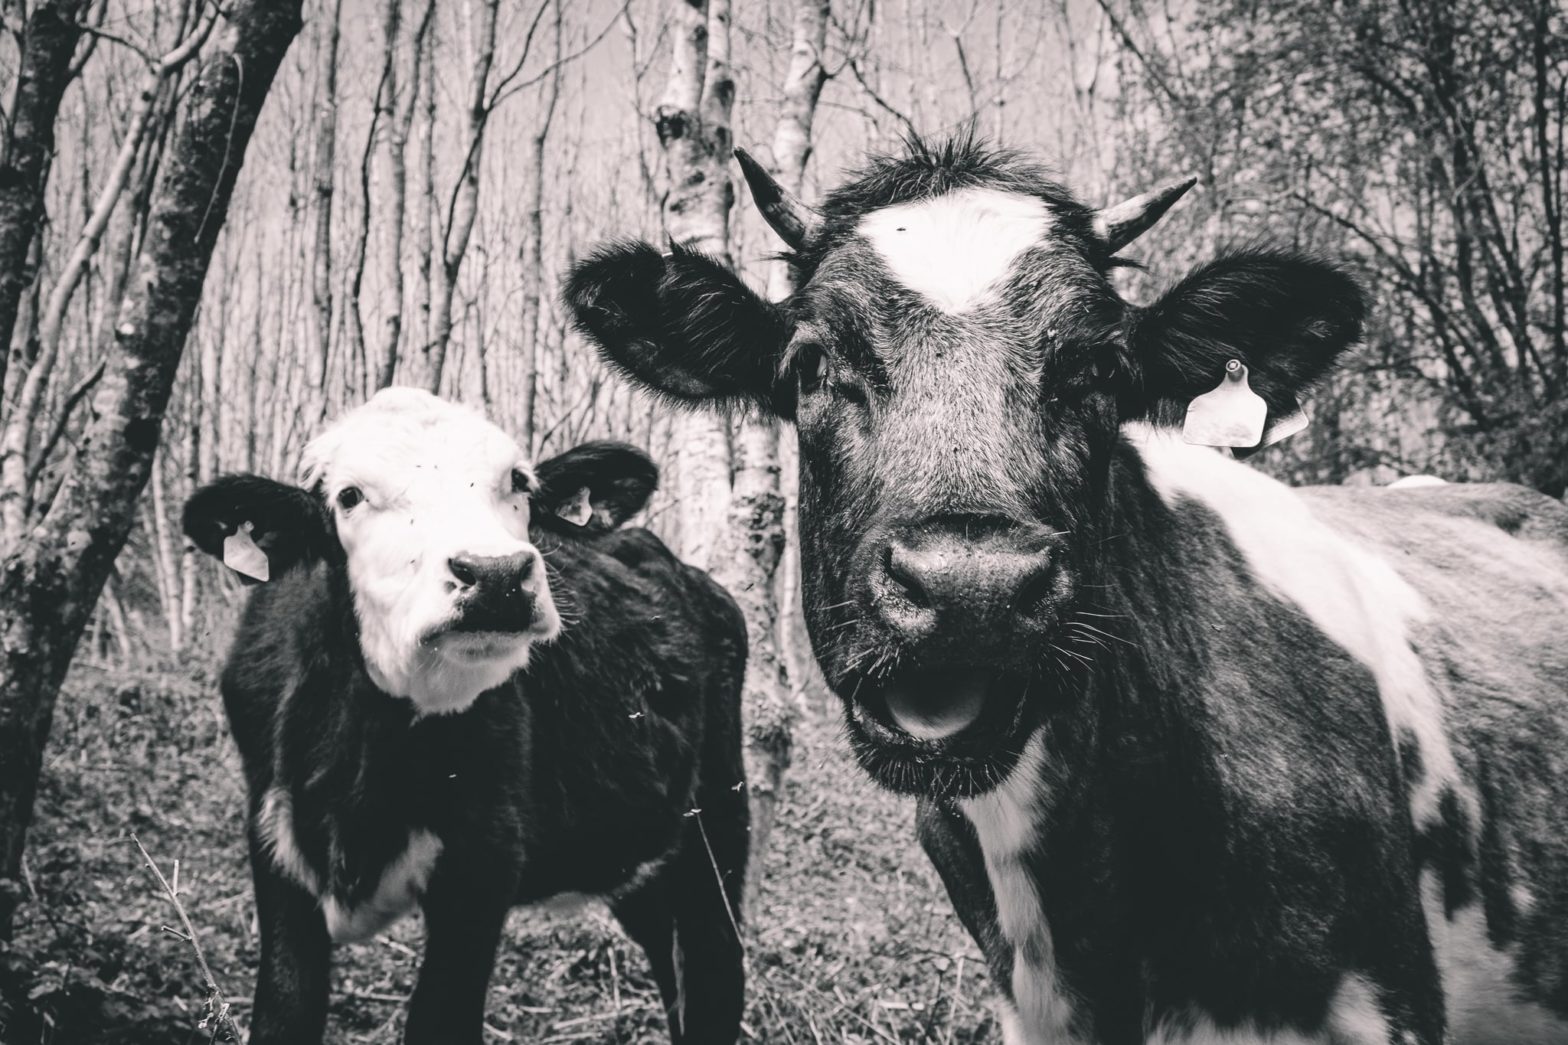 A younger and older cattle looking at the camera with a curious look on their faces